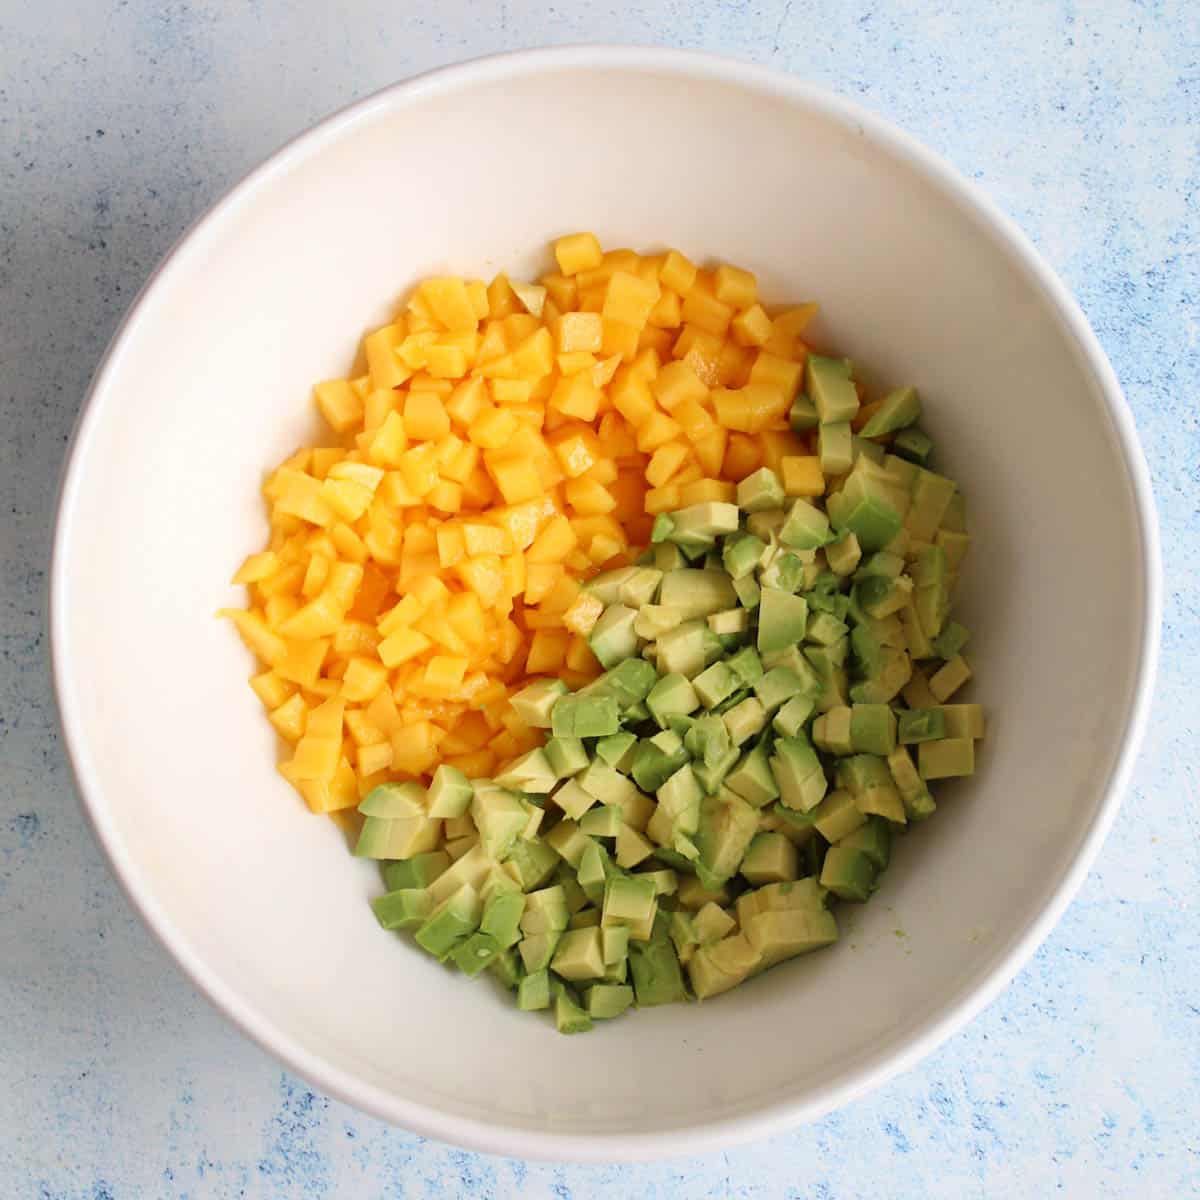 diced mango and avocado in a white bowl